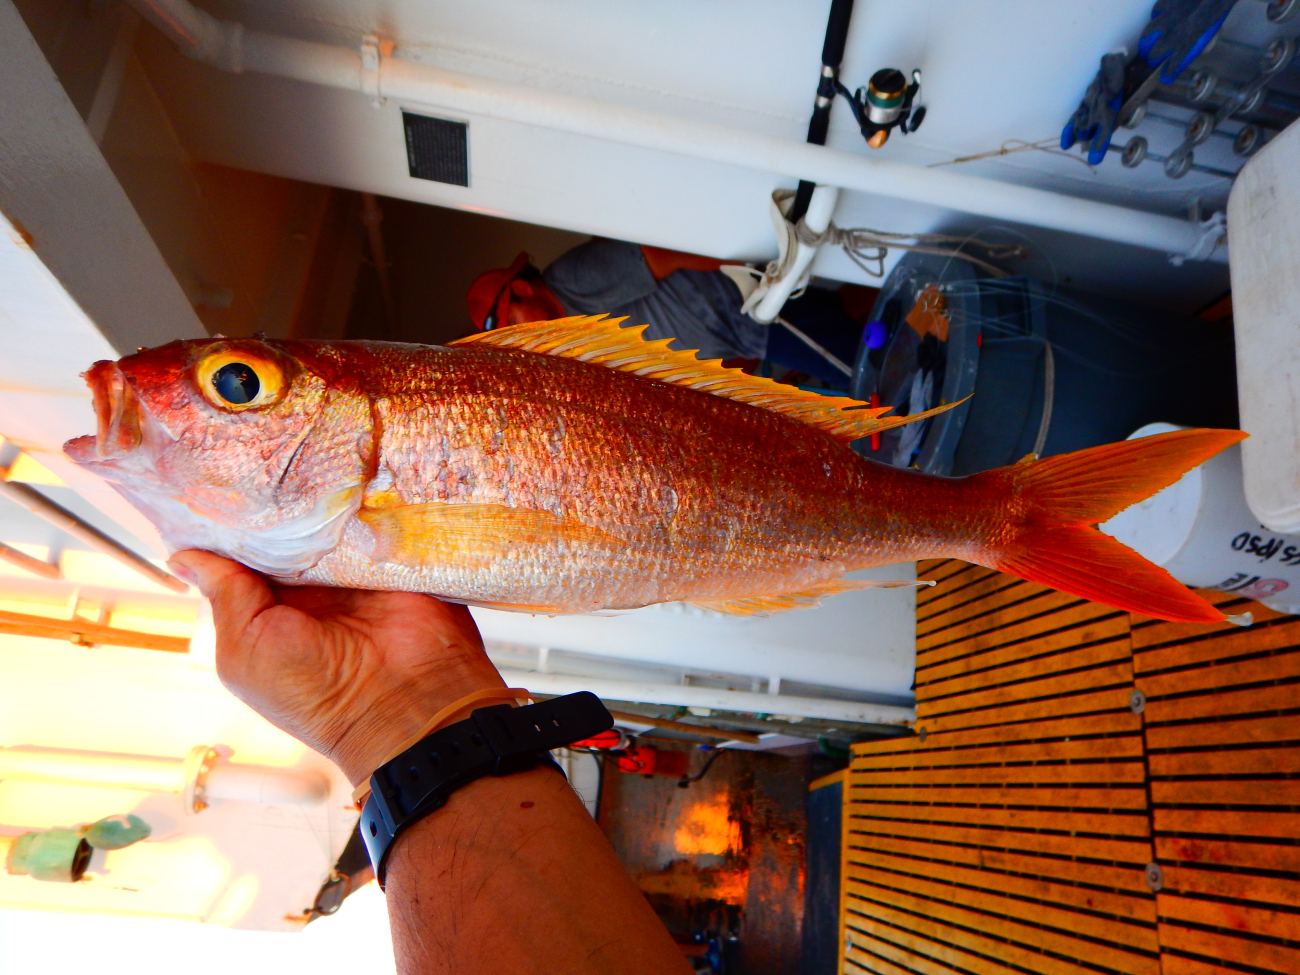 Red snapper fish of the Etelinae subfamily